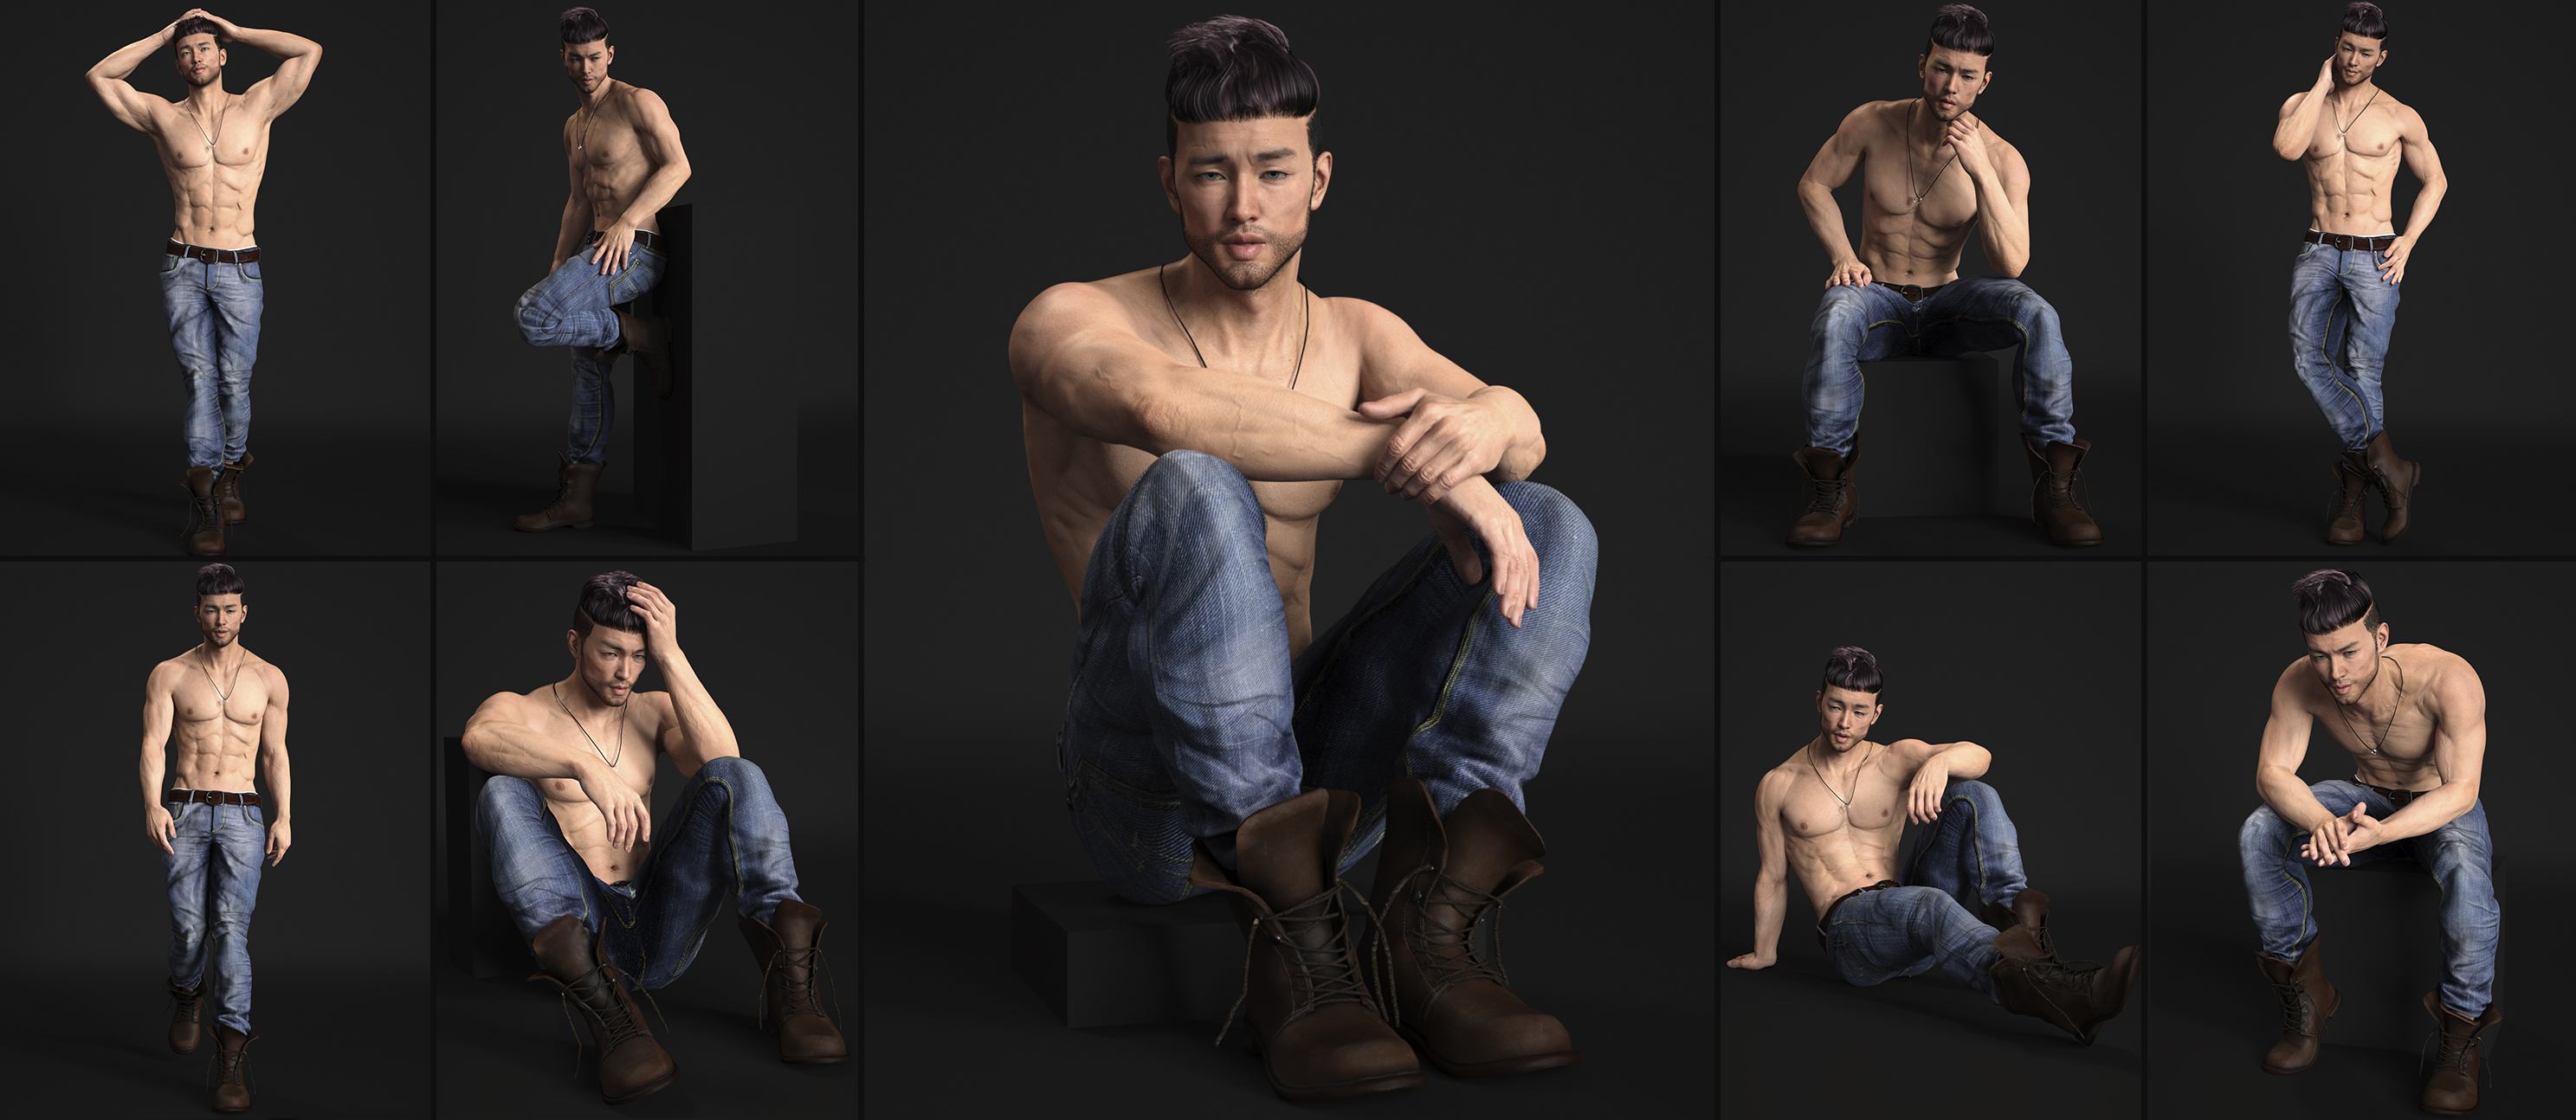 101 Series: Top Model Poses for Genesis 8 Males by: 3D Sugar, 3D Models by Daz 3D